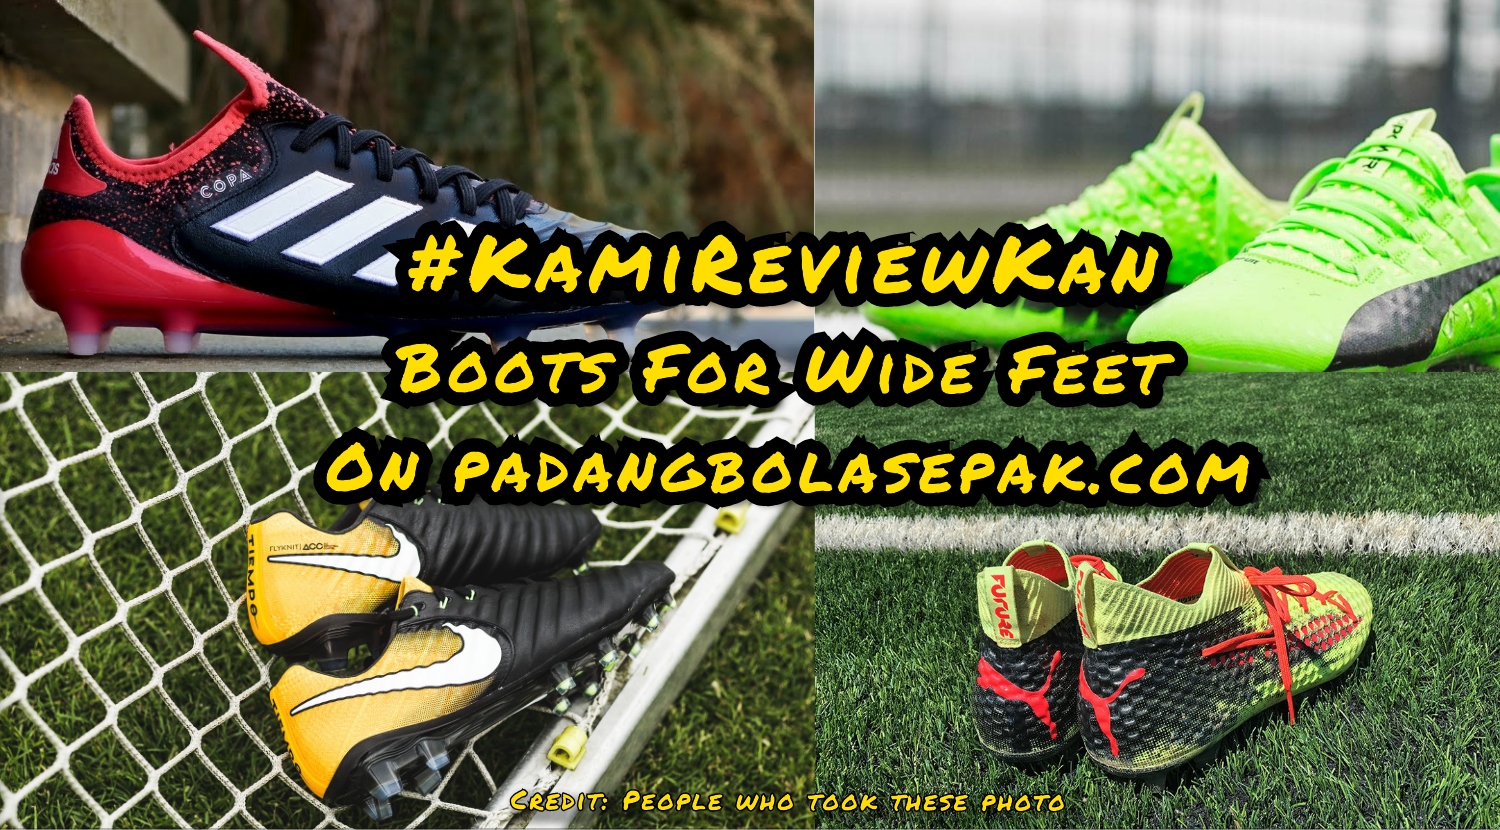 KamiReviewKan: Boots For Wide Feet 